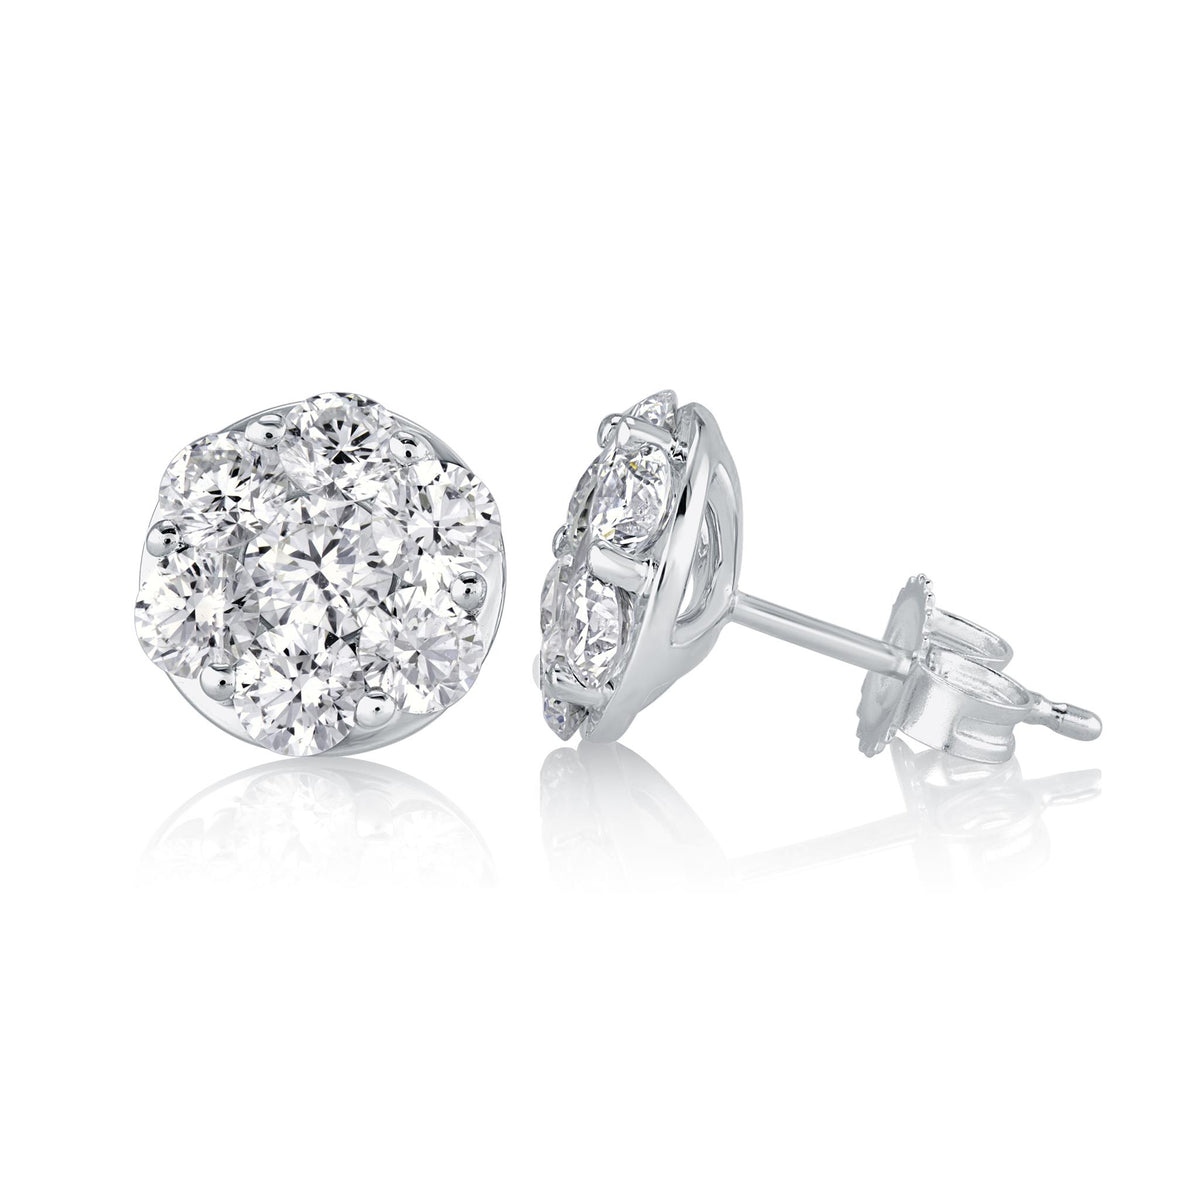 18Kt White Gold Classic Stud Earrings 0.25cttw Natural Diamonds